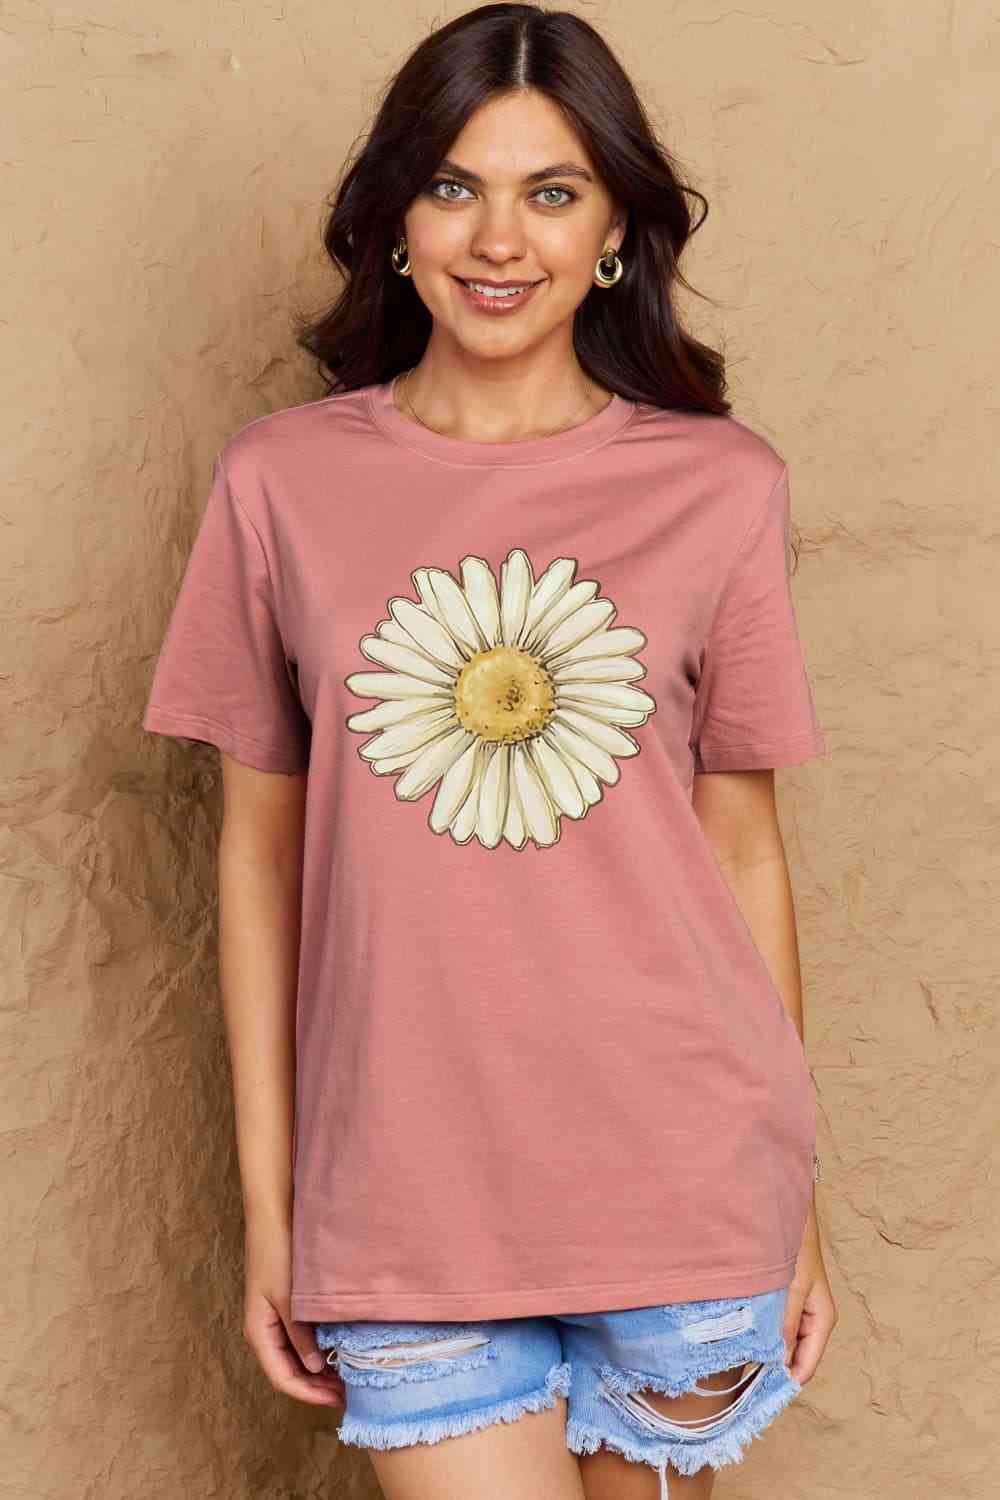 FLOWER Graphic Cotton Tee - T-Shirts - Shirts & Tops - 17 - 2024